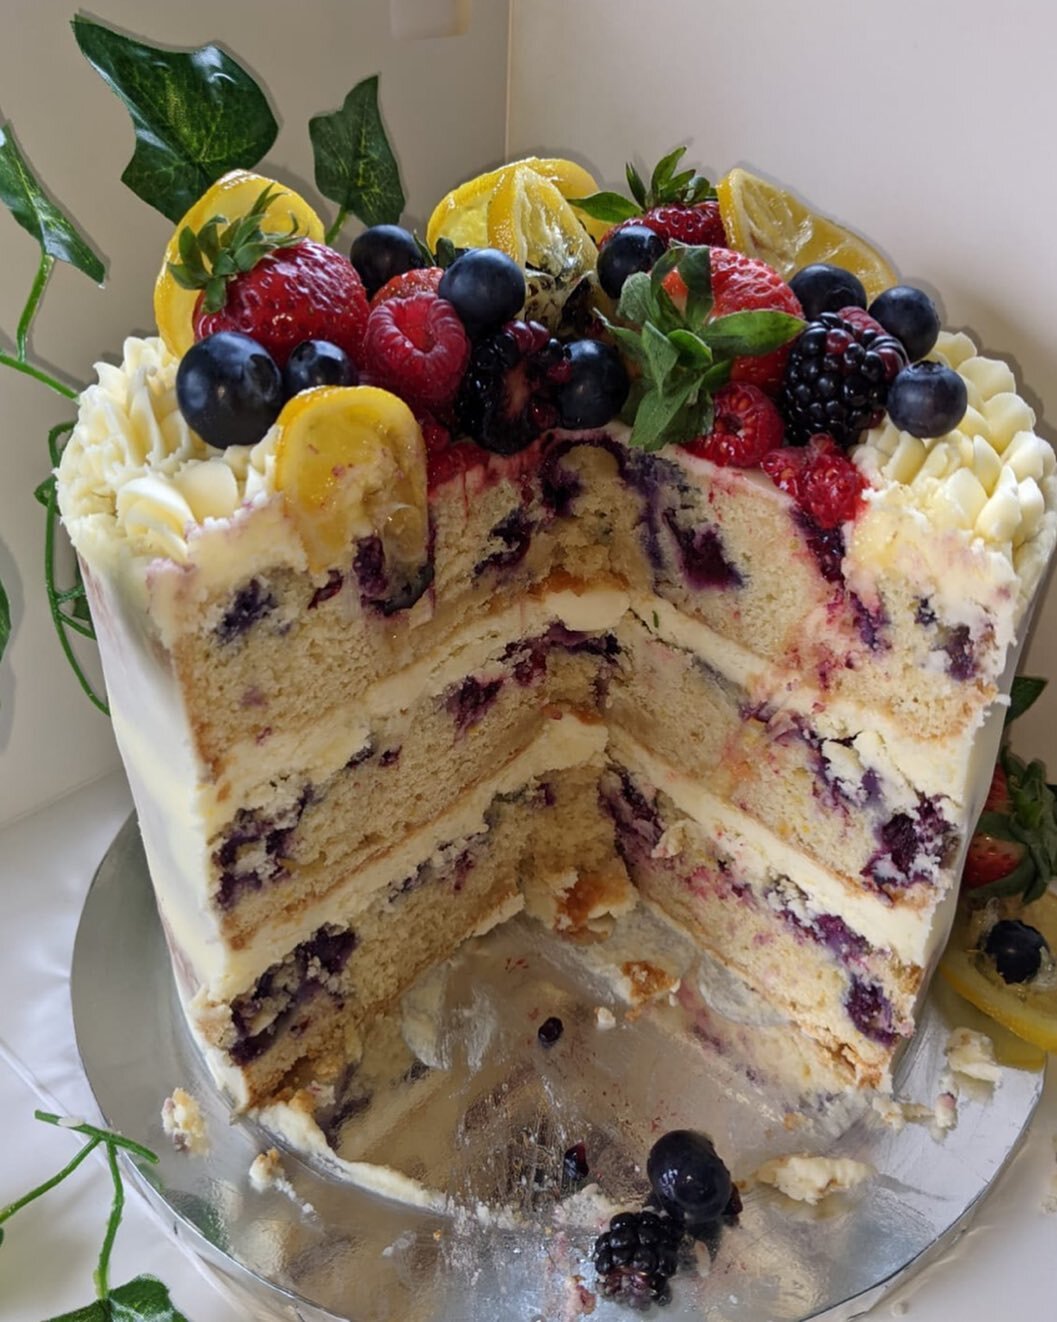 It&rsquo;s what&rsquo;s on the inside that counts 😍

Throwing it back to 2 years ago with the cake guts of this lemon and bluberry cakey goodness, what a dream